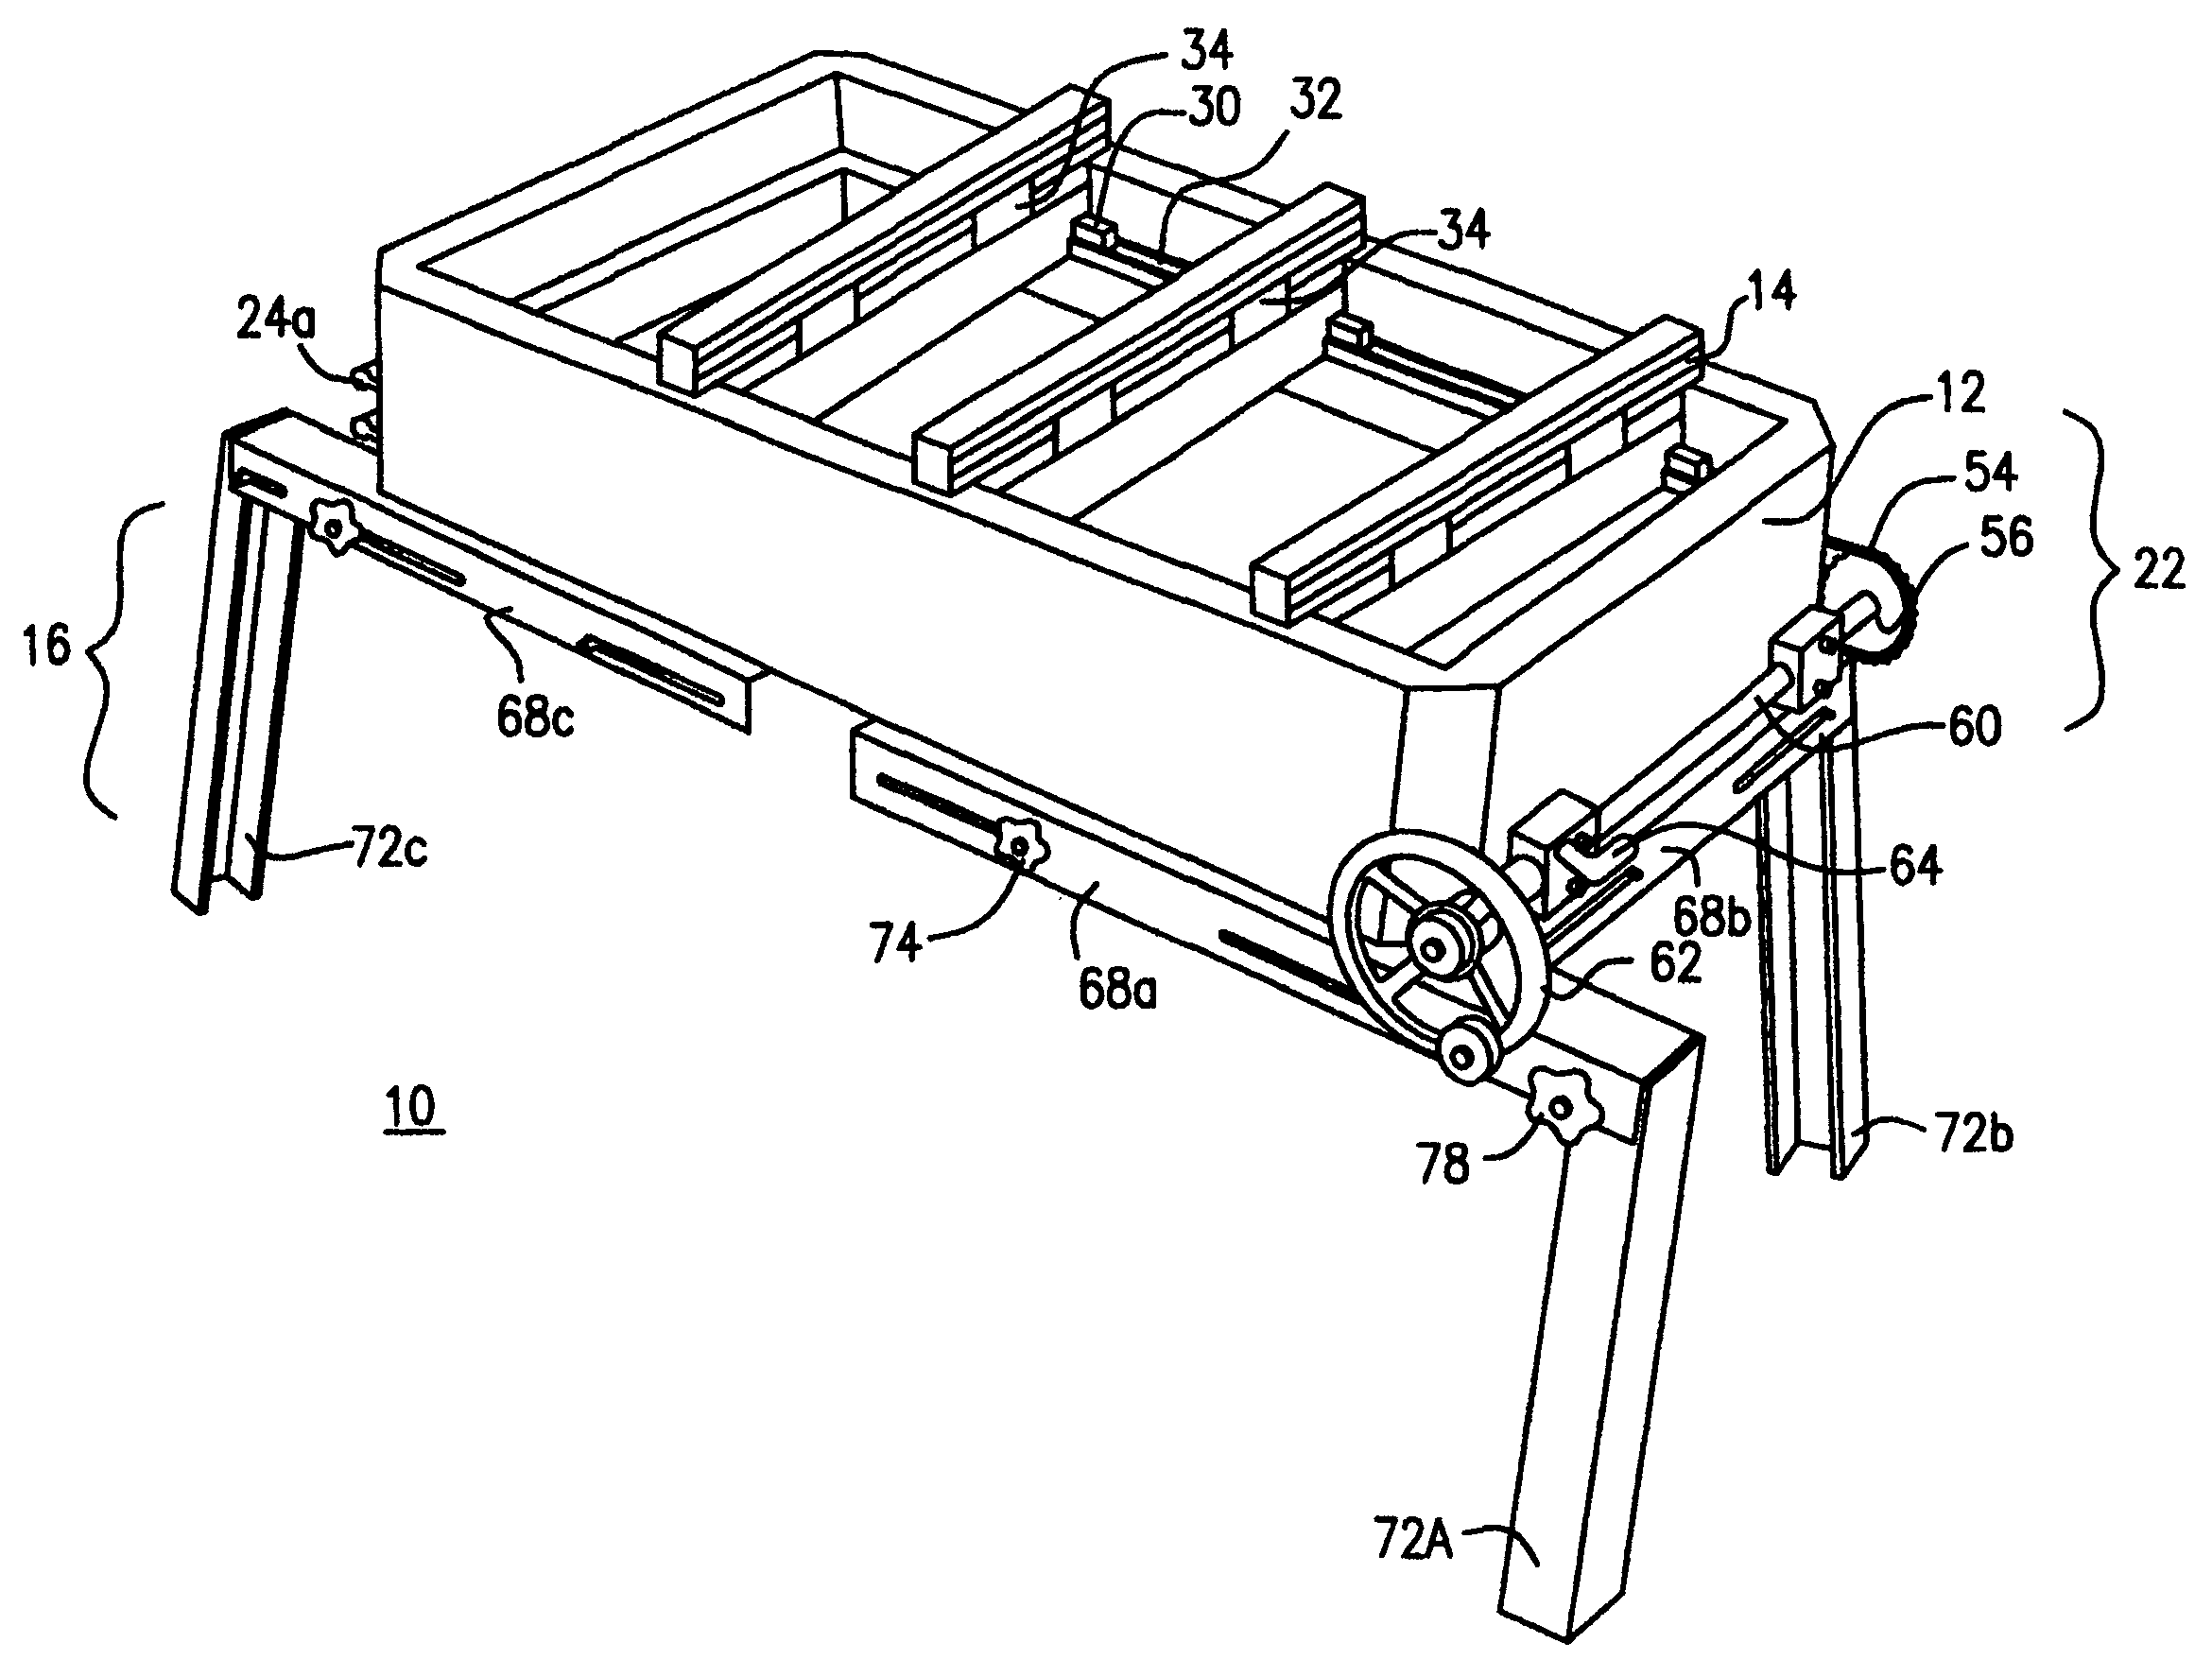 Extendable woodworking system